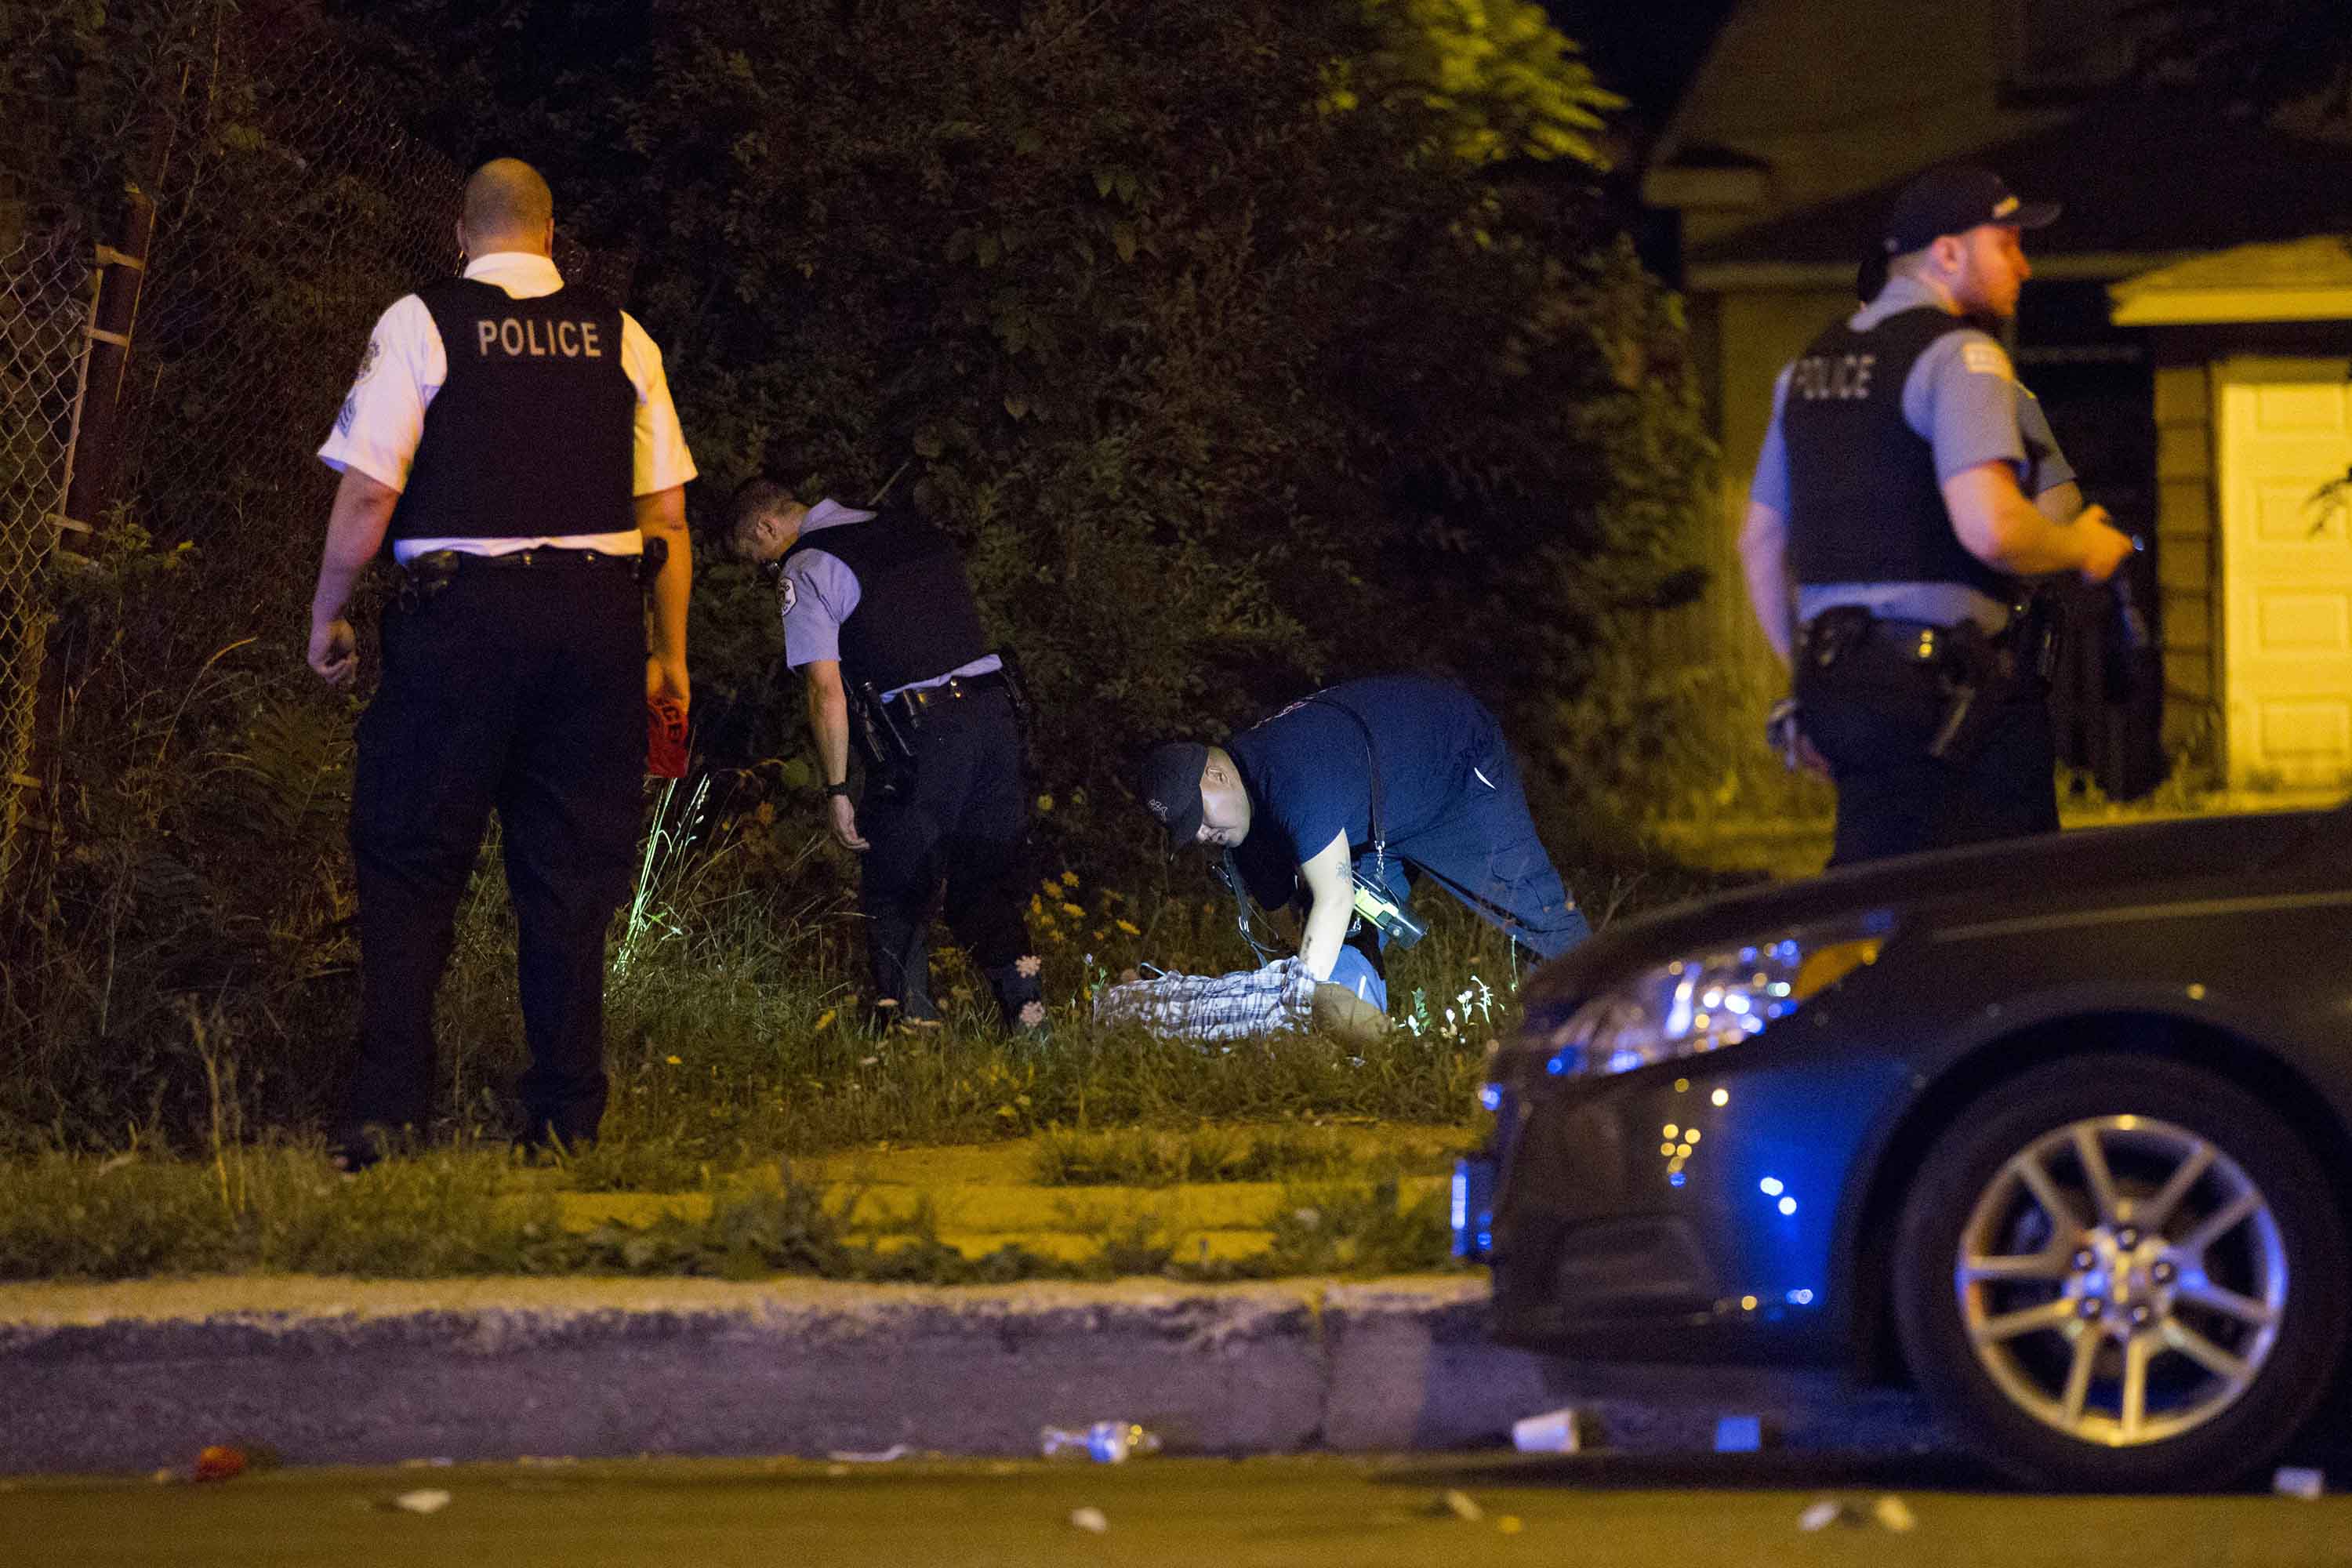 Members of the Chicago Police Department work the scene where two men were shot, one fatally, on the 6500 block of South Ashland Avenue Friday, Aug. 12, 2016, in Chicago. (Armando L. Sanchez/Chicago Tribune/TNS)